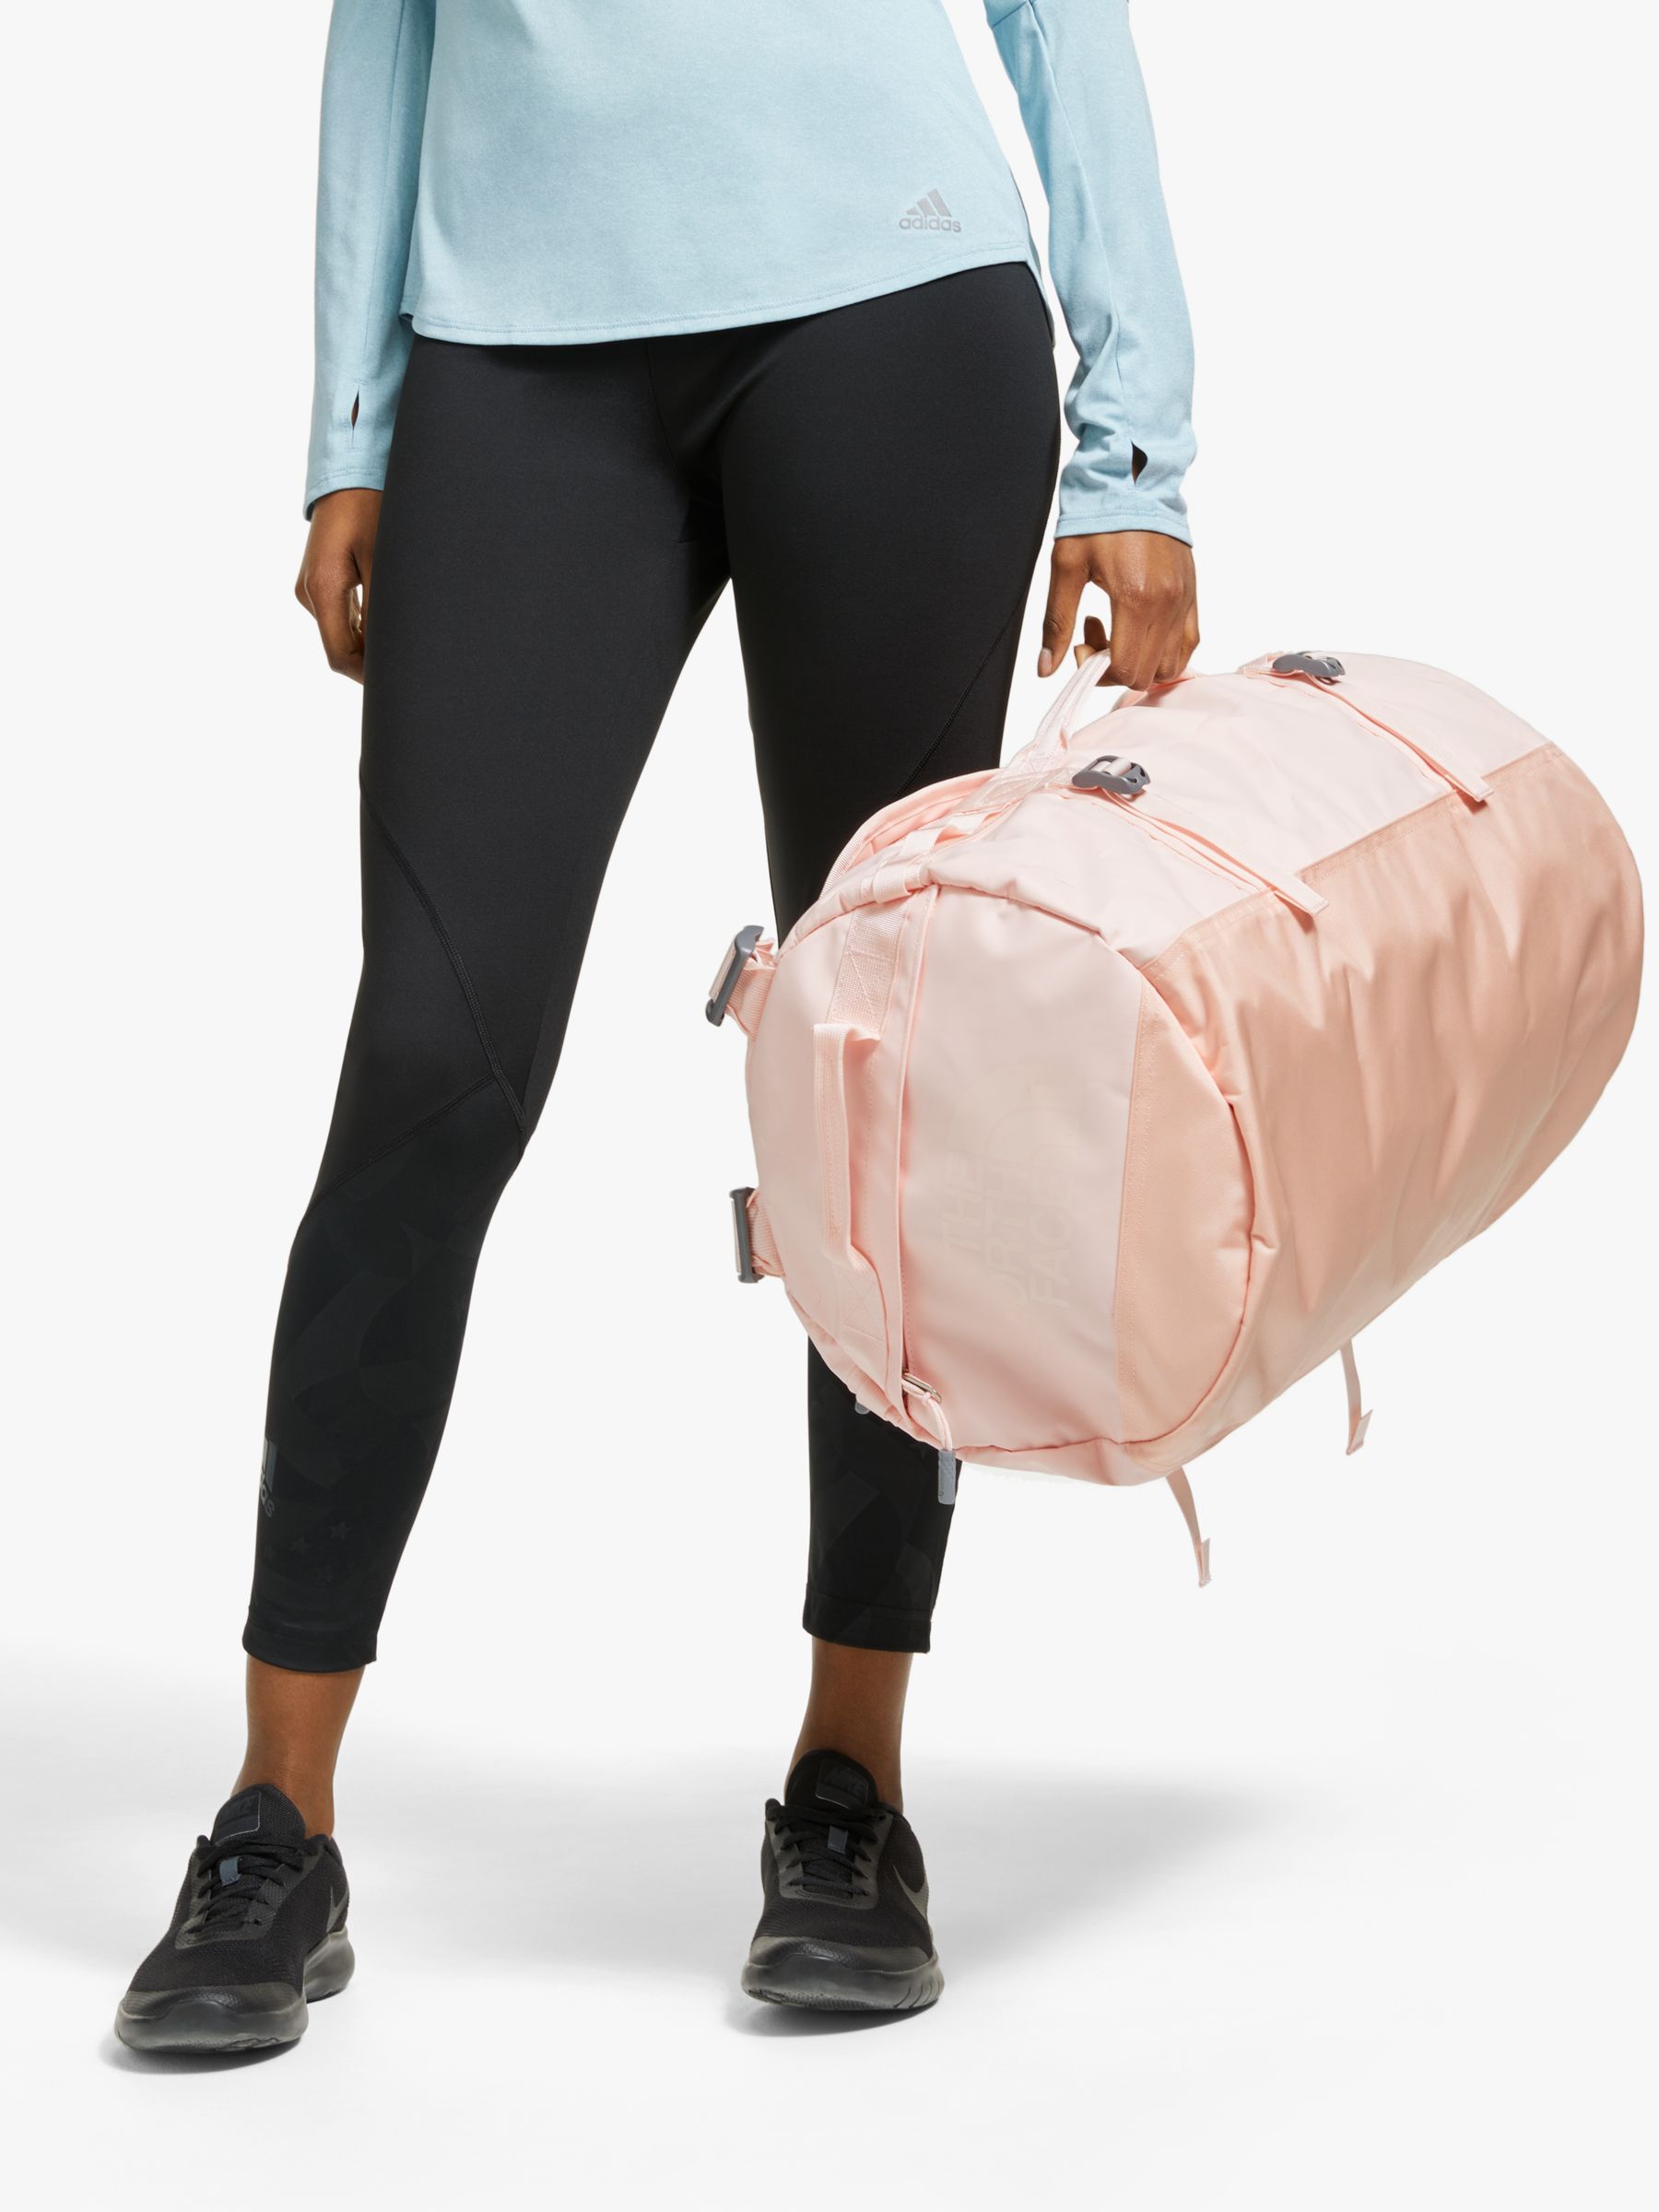 the north face base camp duffel s pink